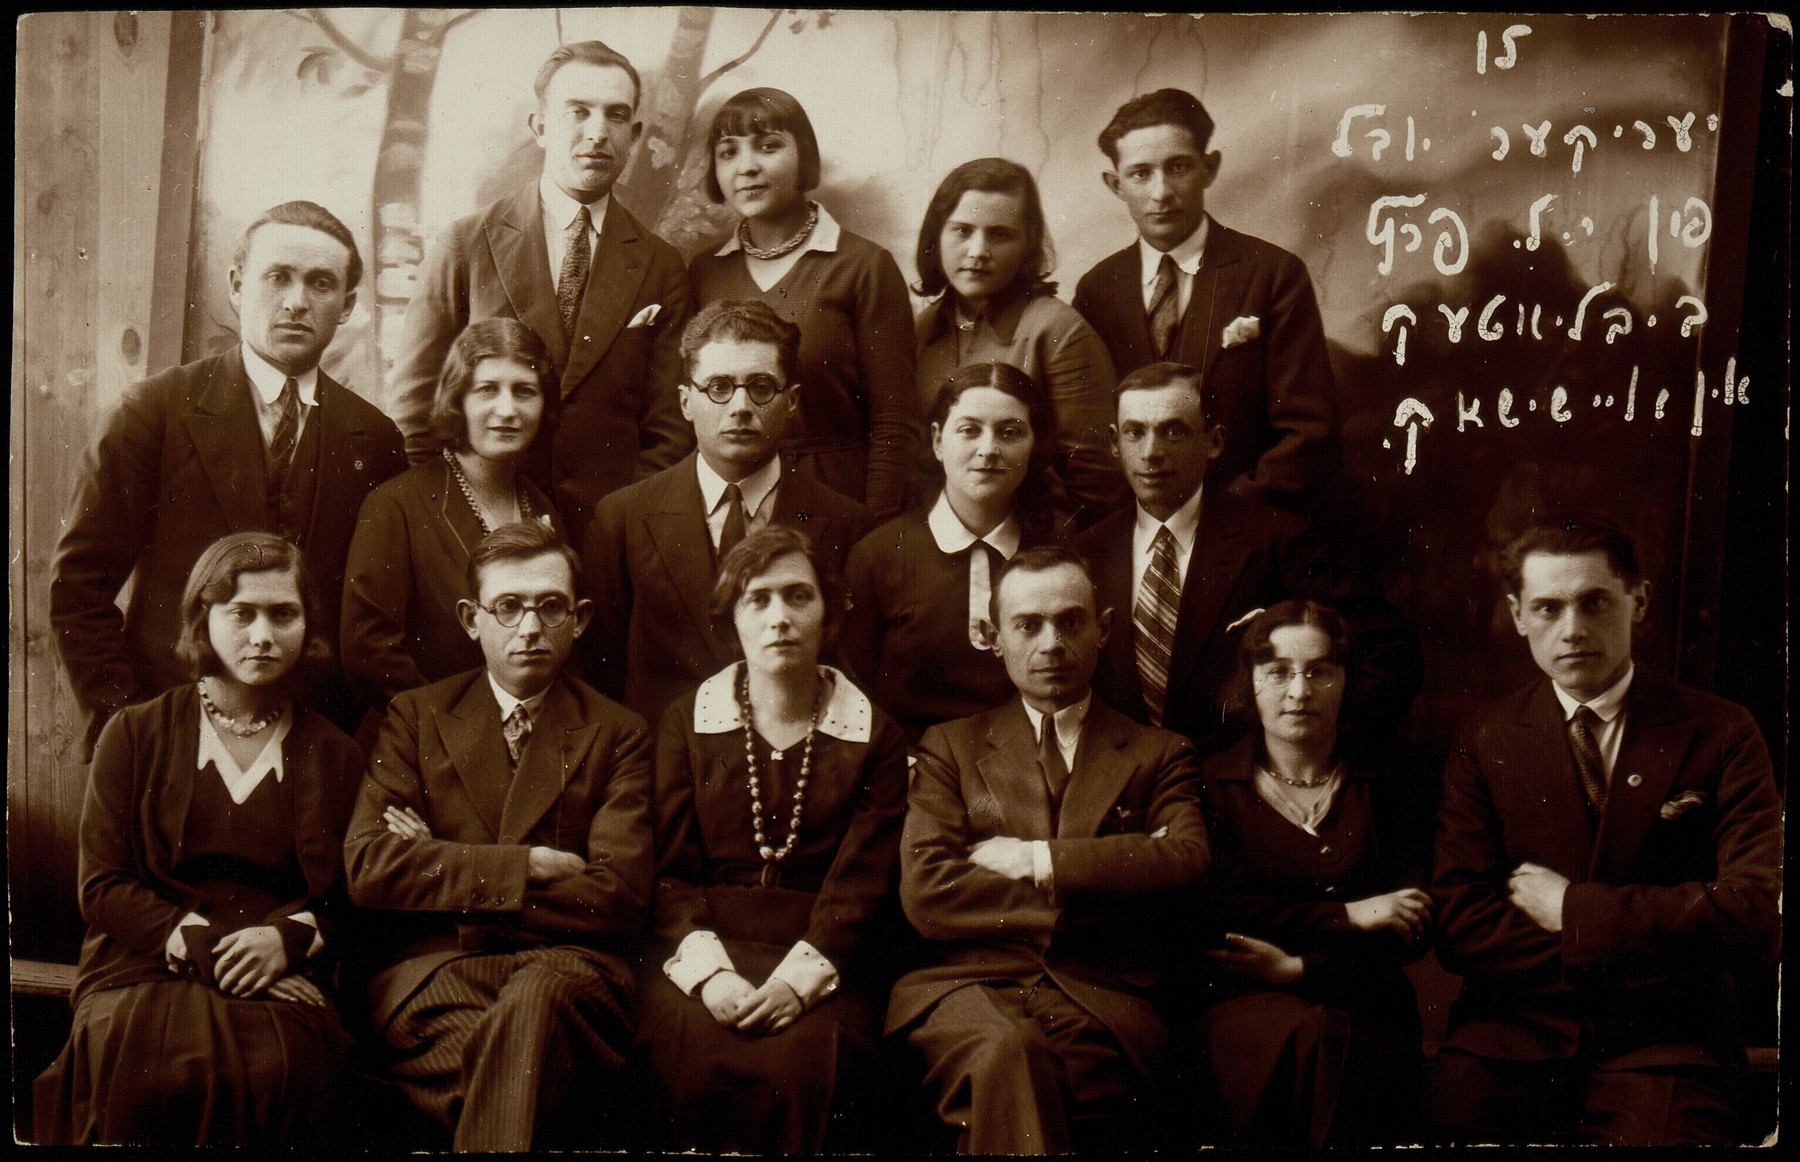 Commemoration of the 15th anniversary of the Y. L. Peretz library.  

(first row, left) Batia Bastunski and Mordekhai (Motl) Replianski; Velvke Katz (fourth from left); (middle row, left) Velvke Kaganowicz;  Eli Politacki (third from left); Malka Matikanski (top row, second from left). 

Batia immigrated to America; Malka went to Palestine.  Most of the other people pictured were murdered by the Germans during the September 1941 killing action in Eisiskes.